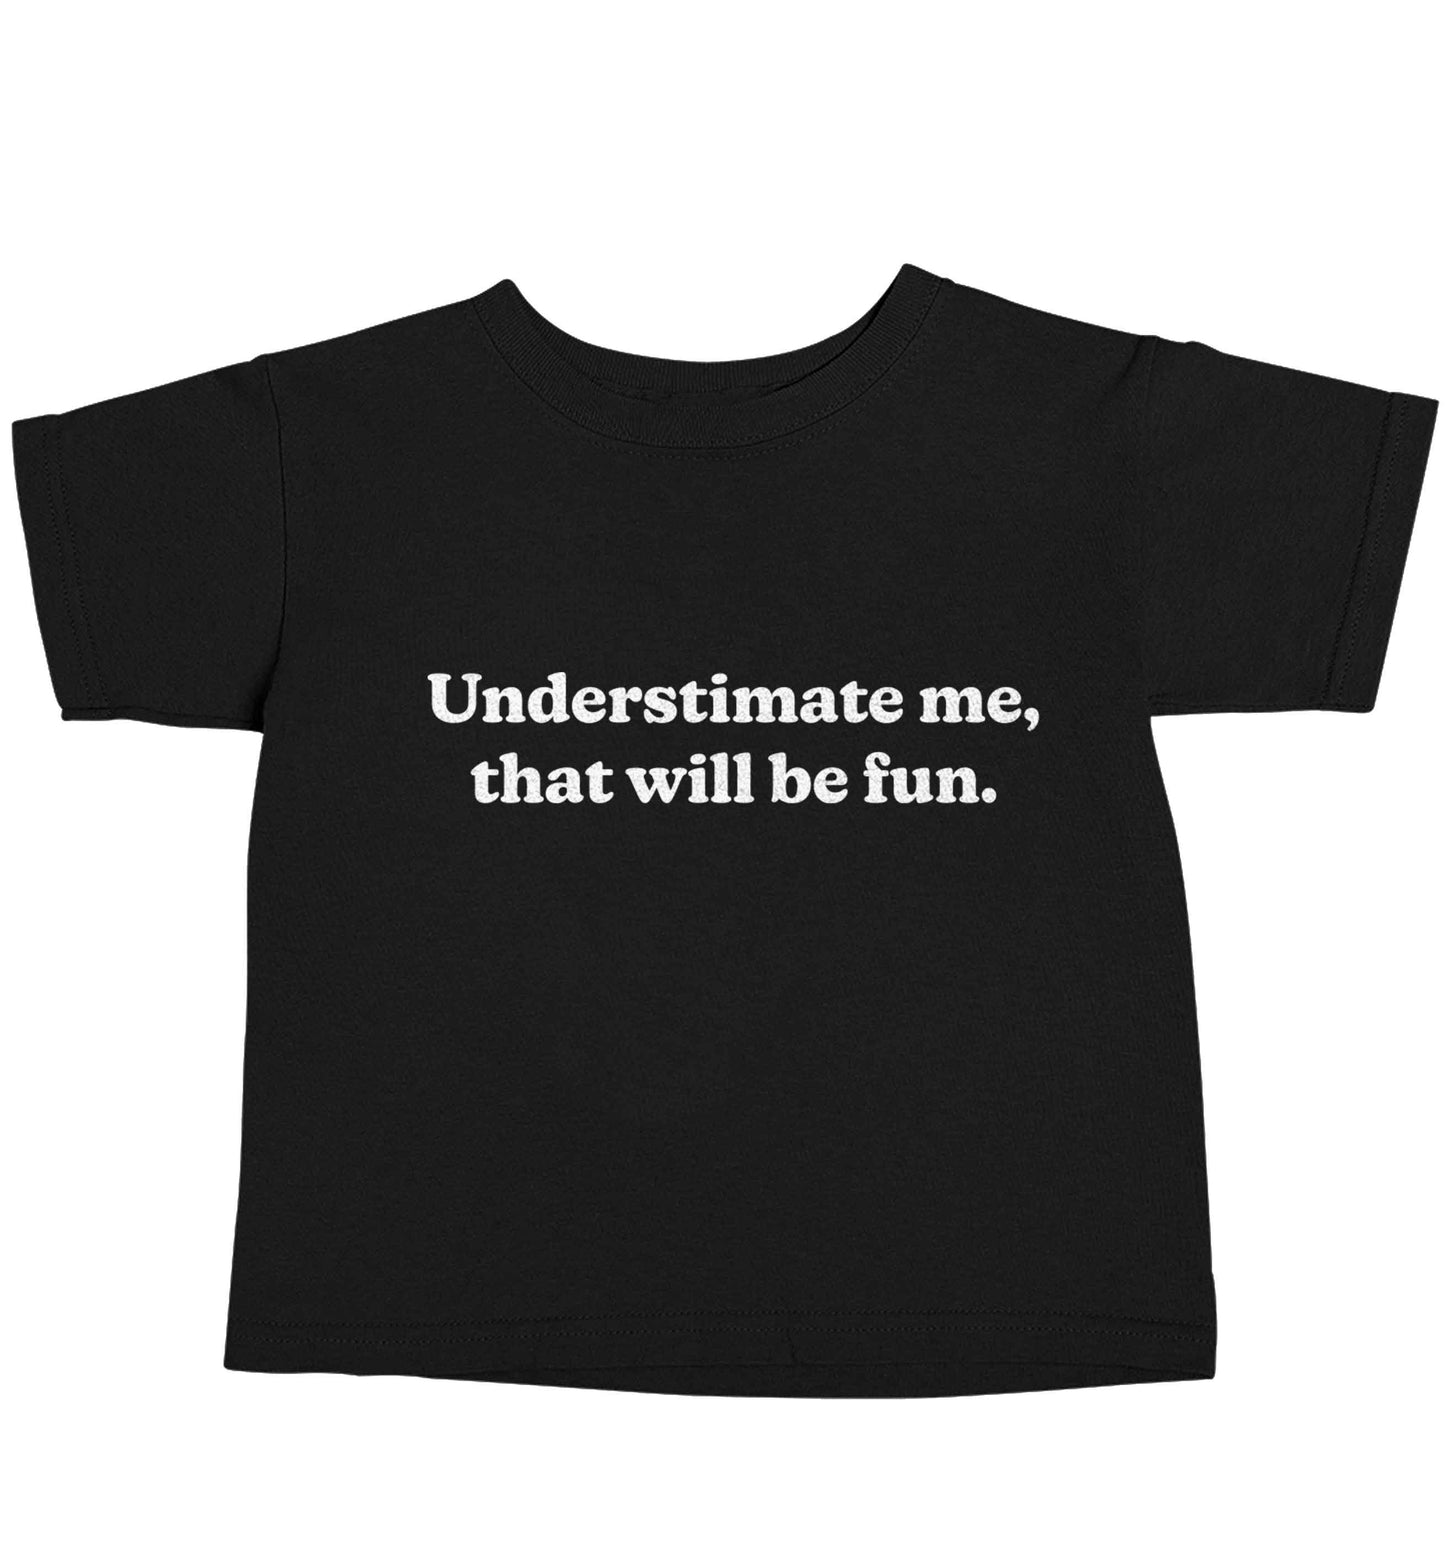 Underestimate me that will be fun Black baby toddler Tshirt 2 years